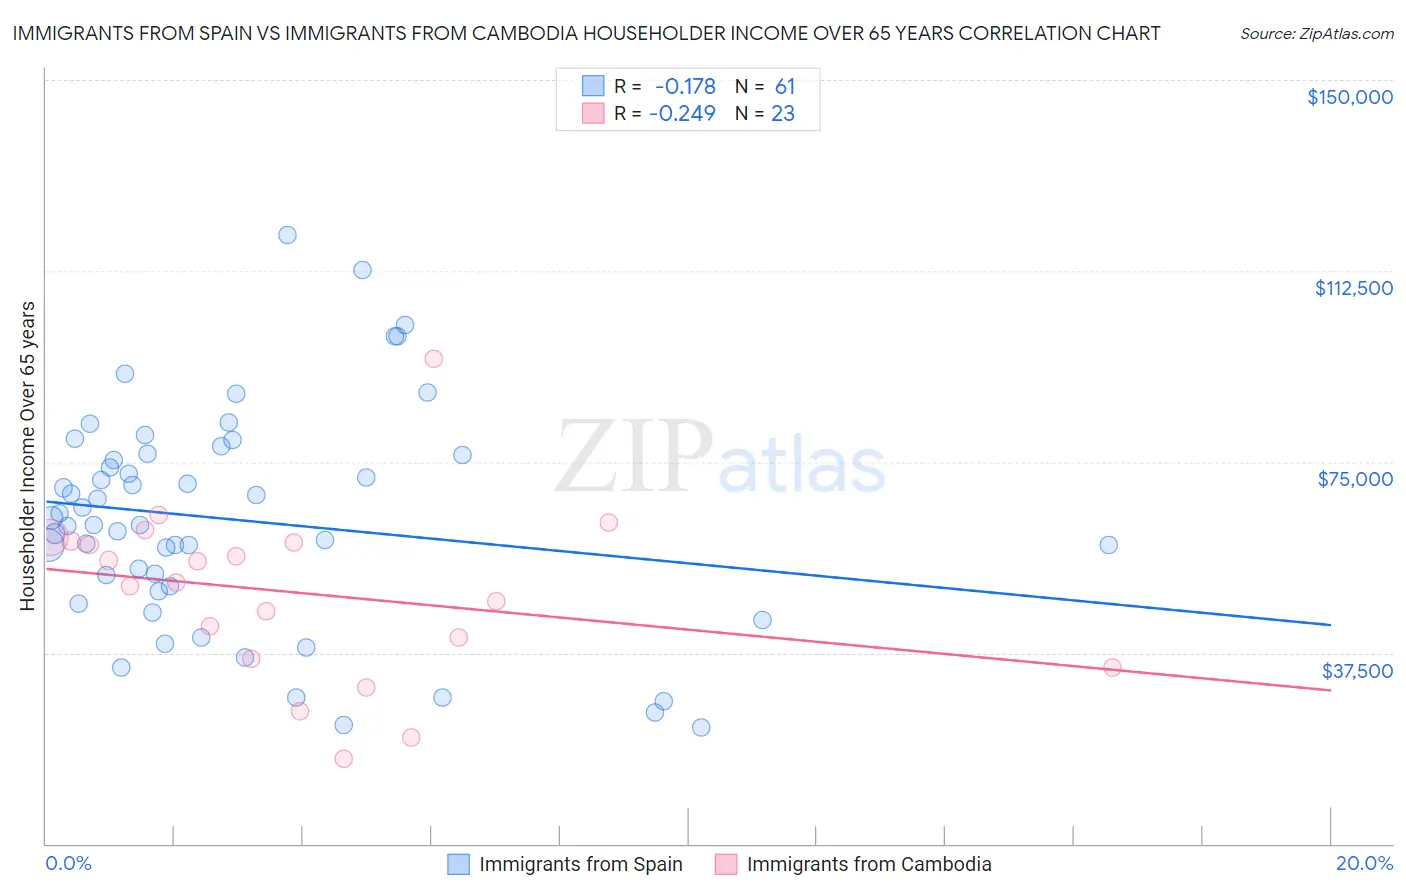 Immigrants from Spain vs Immigrants from Cambodia Householder Income Over 65 years